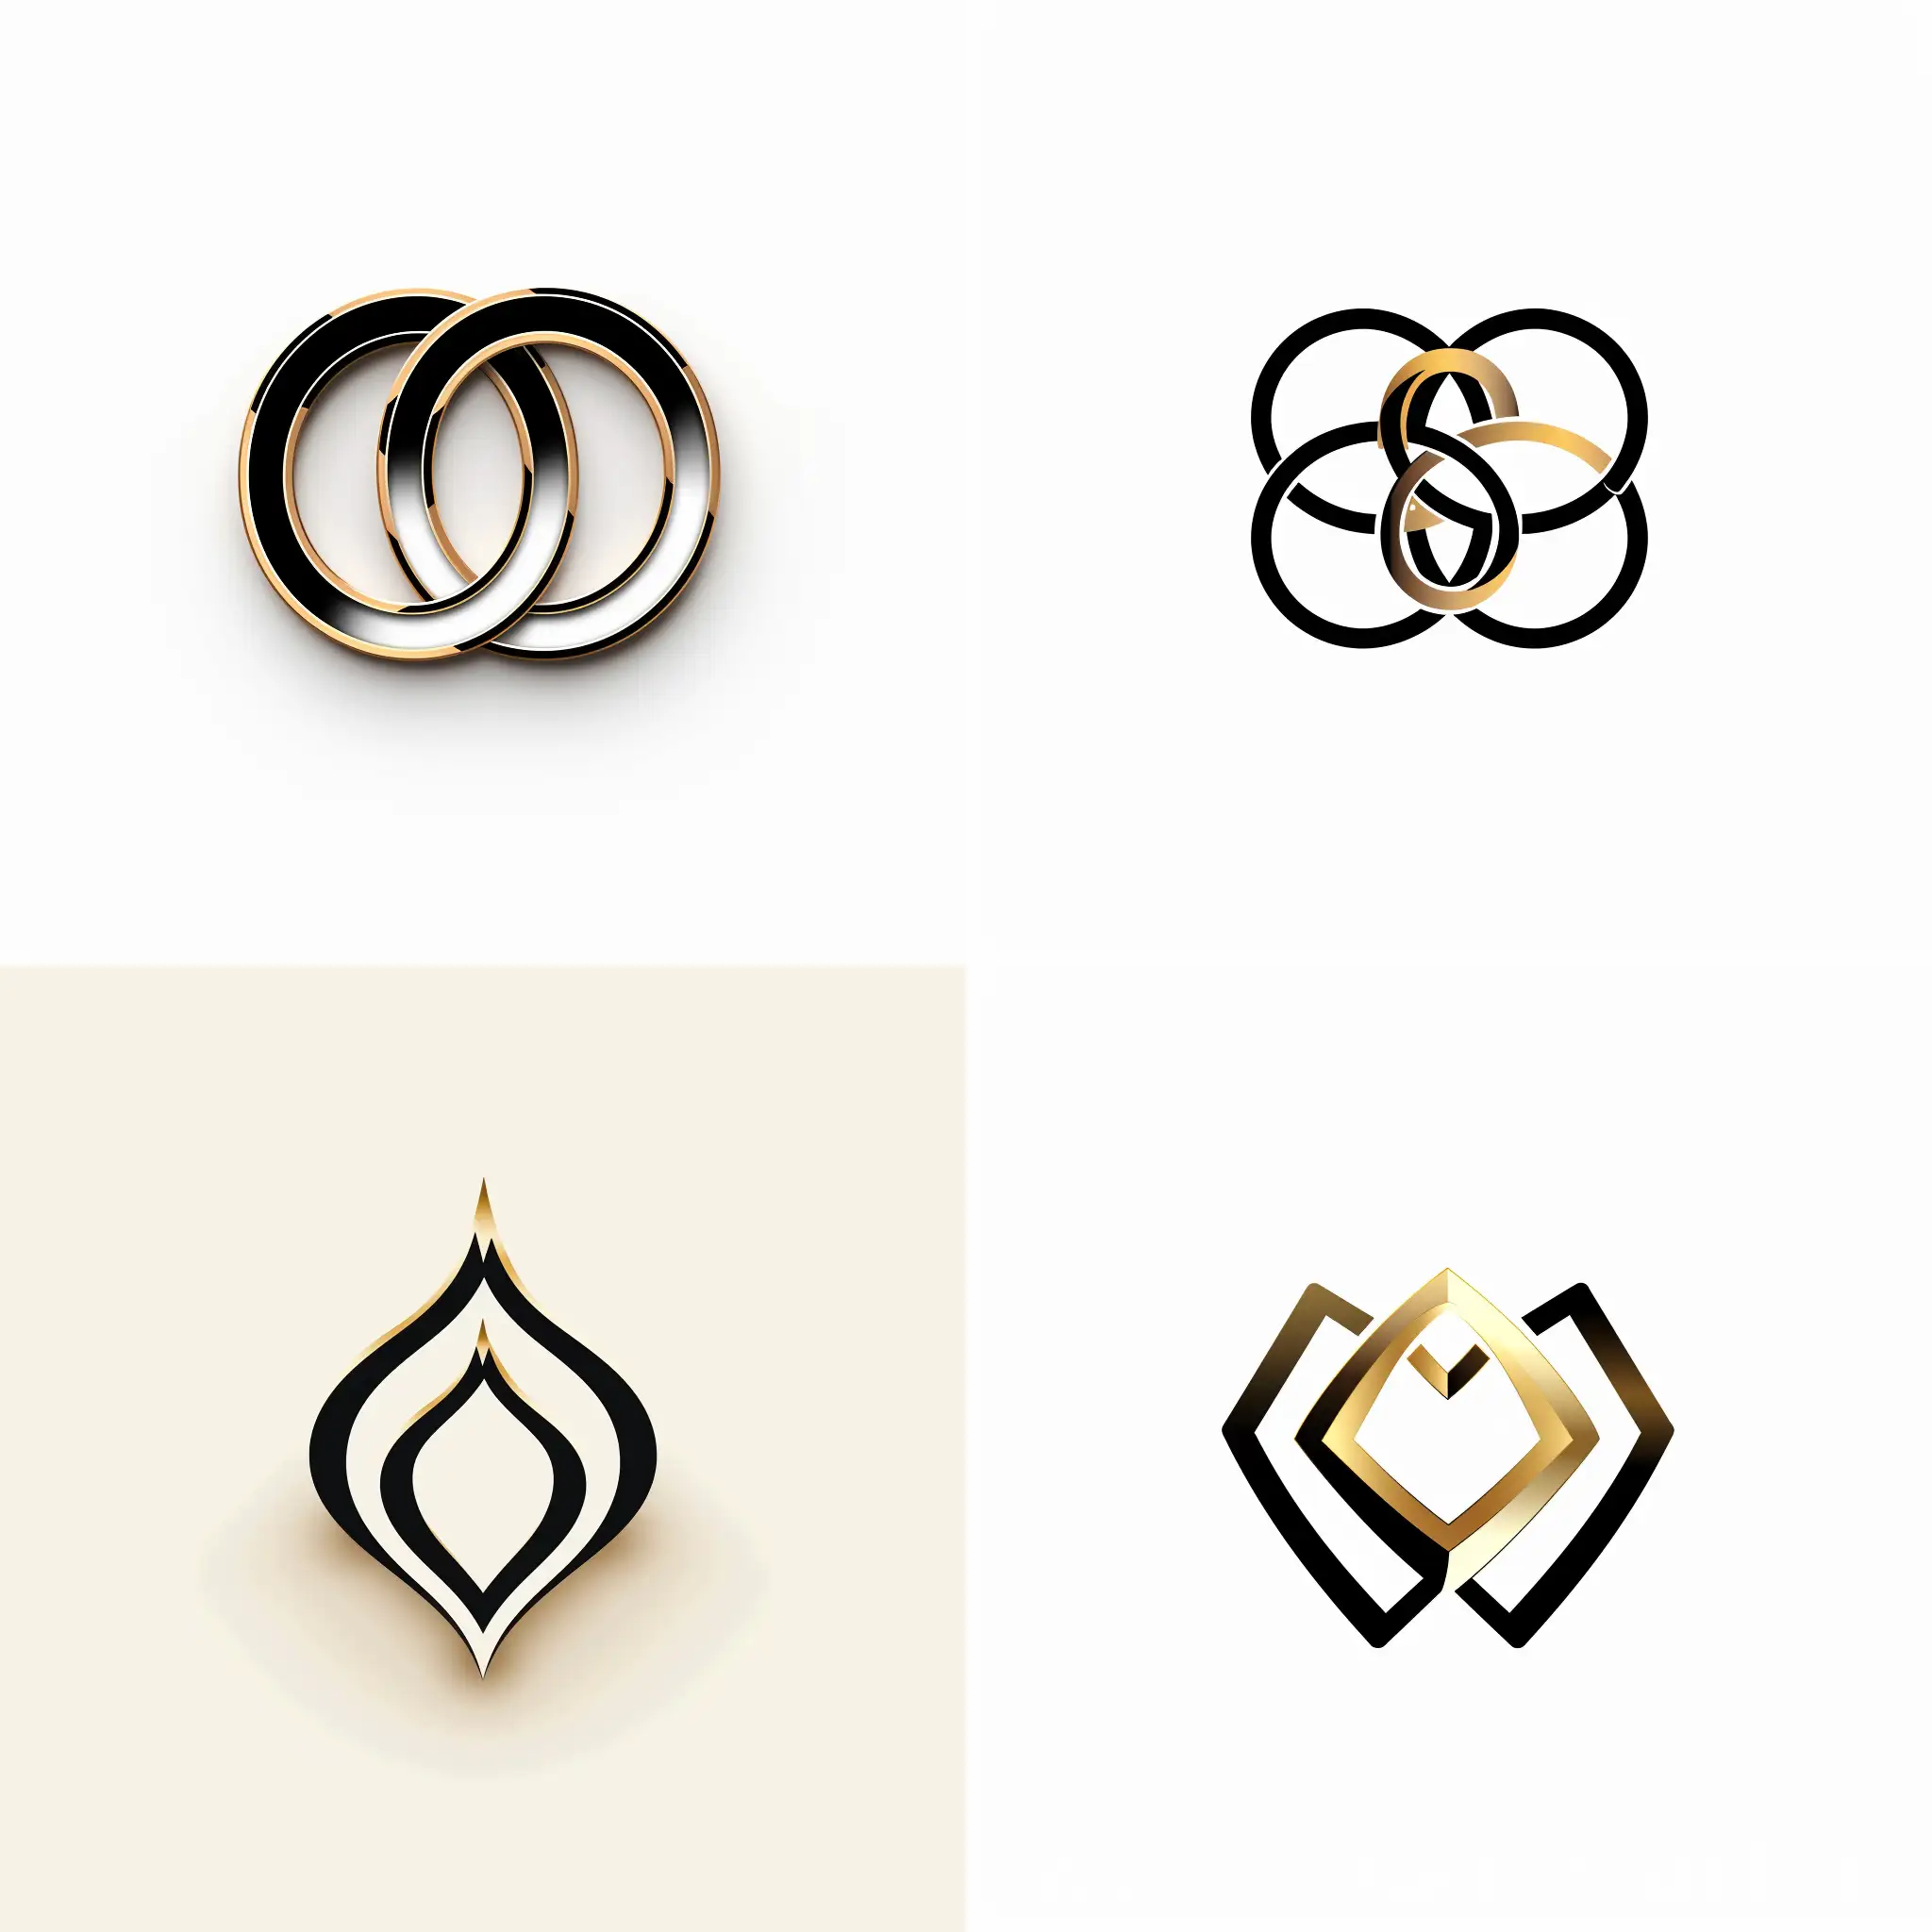 jewellery logo, Luxury graphic logo, icon, high contrast, minimalist, thick rounded black outlines, icon, in the style of professional golden brand logos, isolated, flat white background